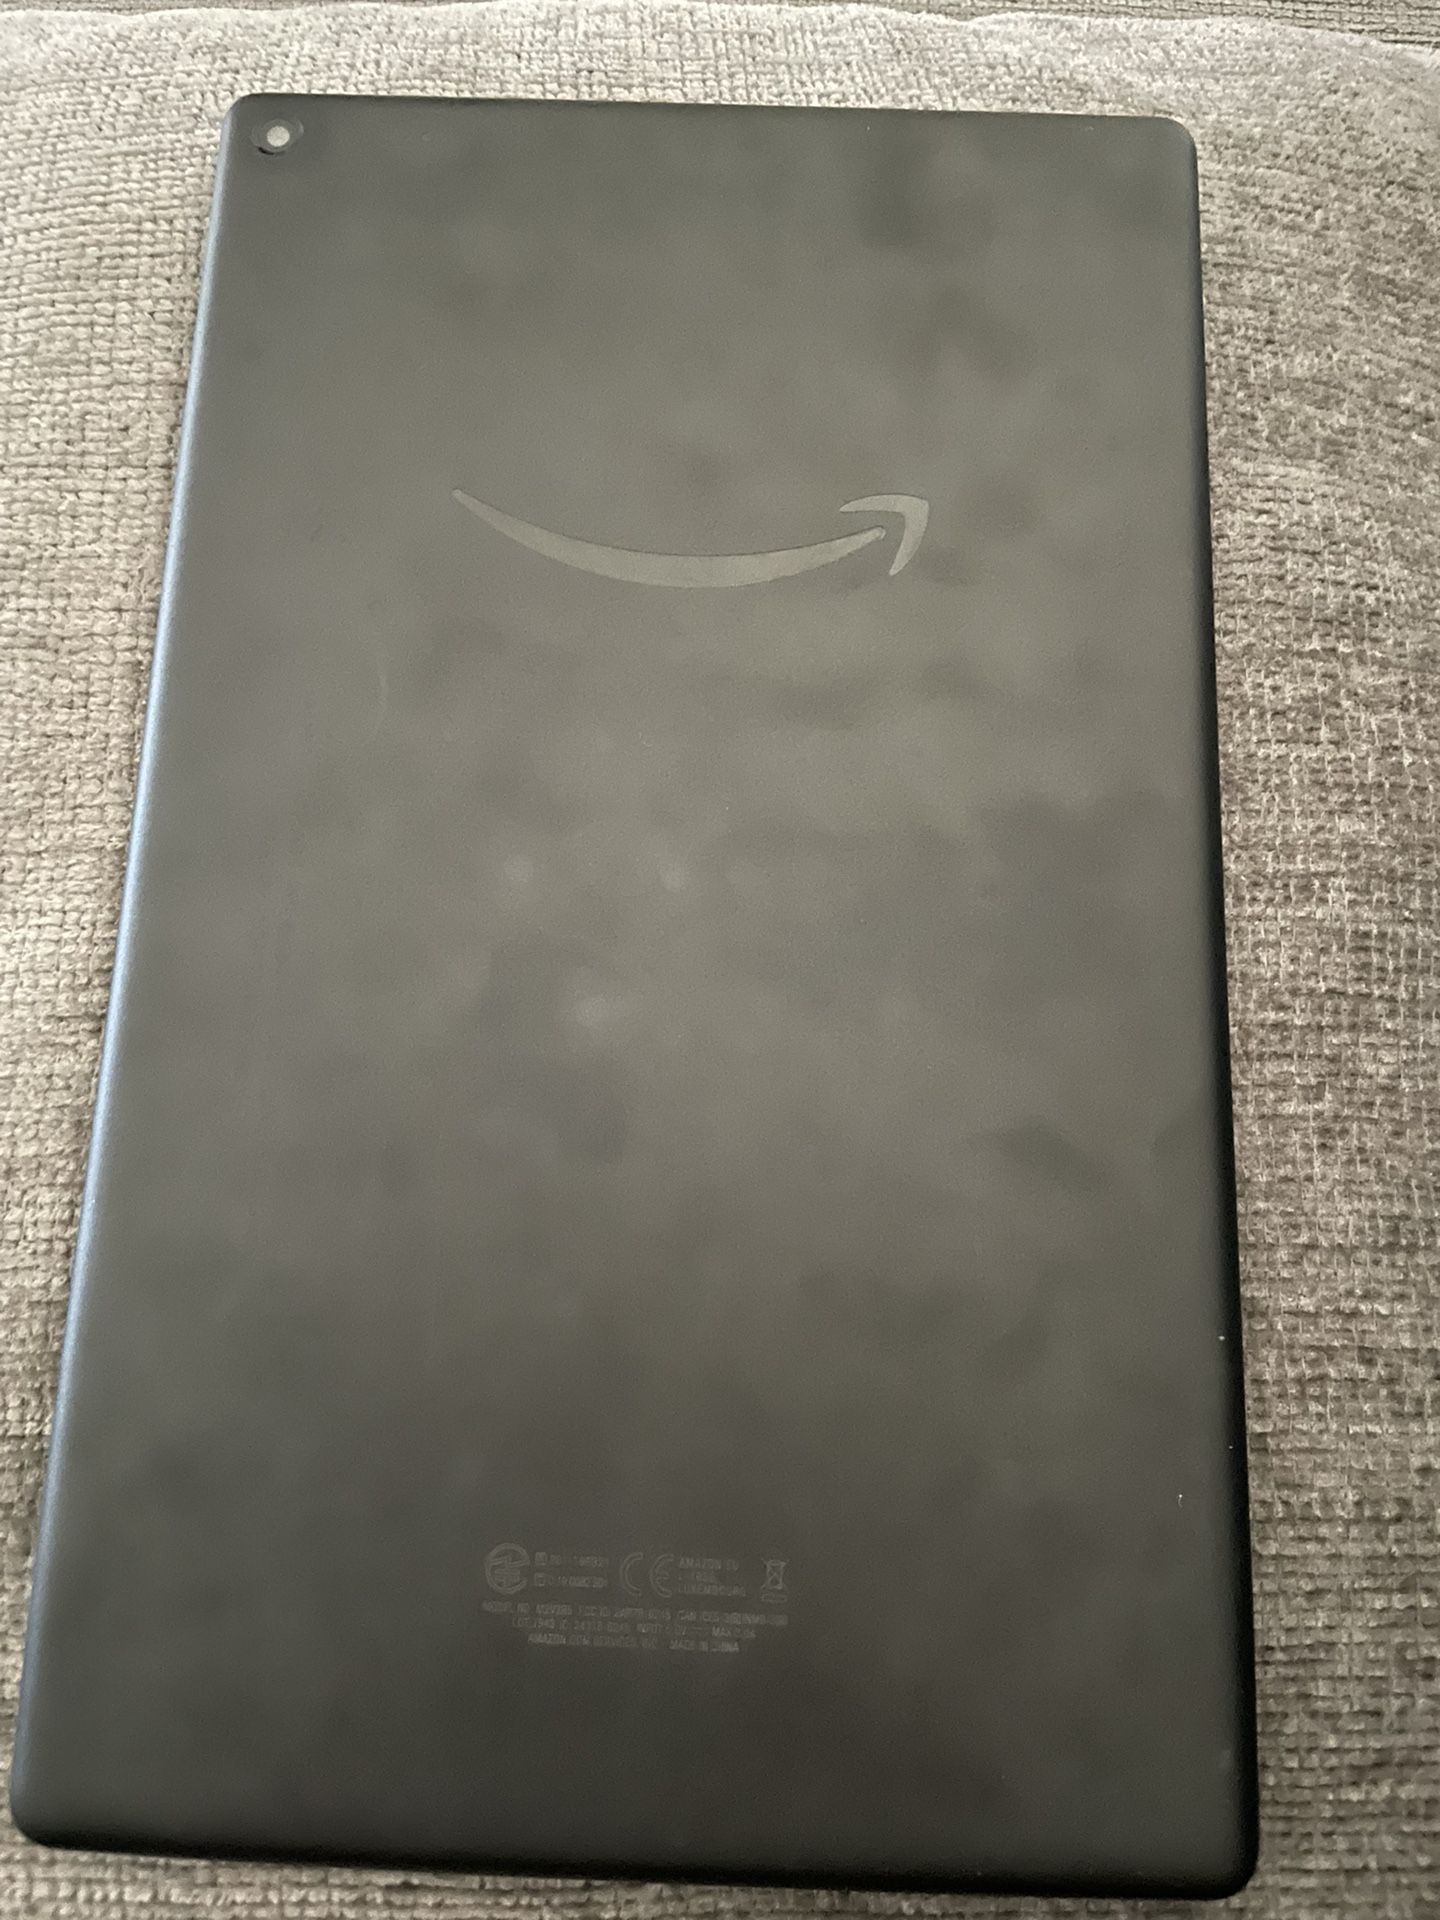 Amazon Fire HD 10 Tablet (9th Generation)